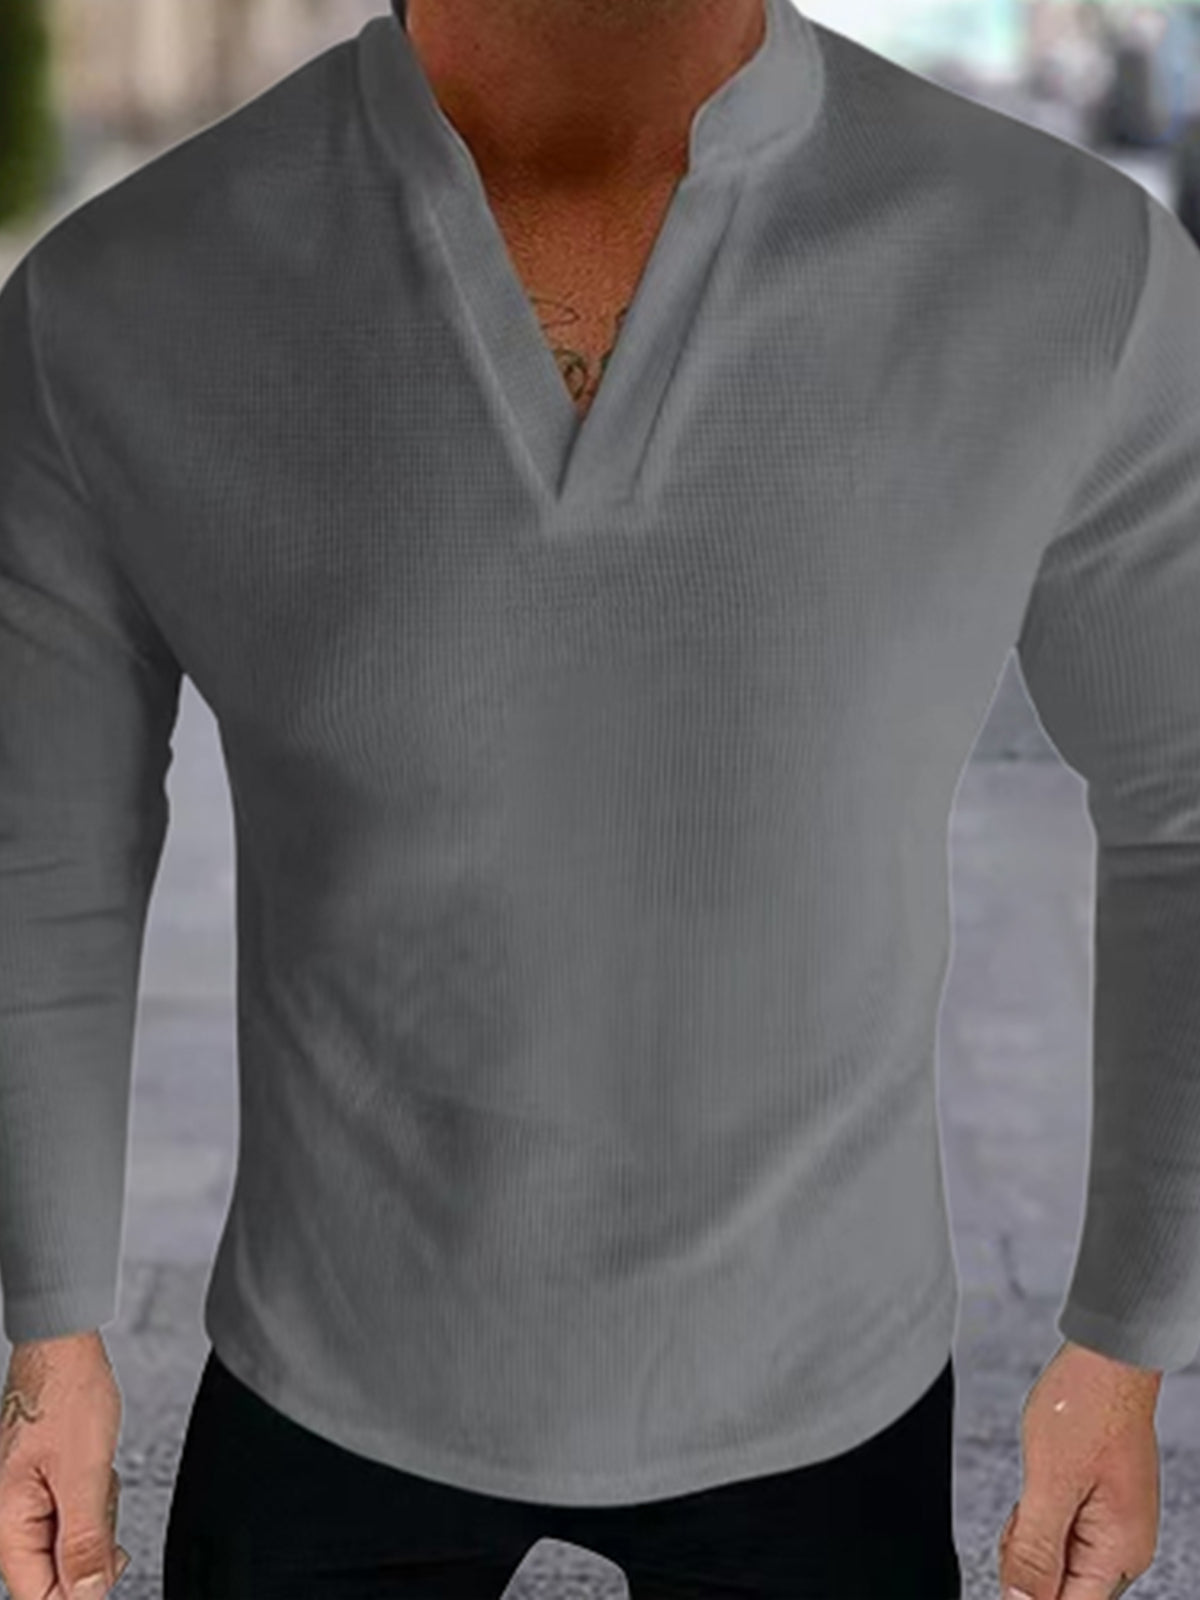 Casual Solid Color V-Neck Long Sleeve Men's Tops